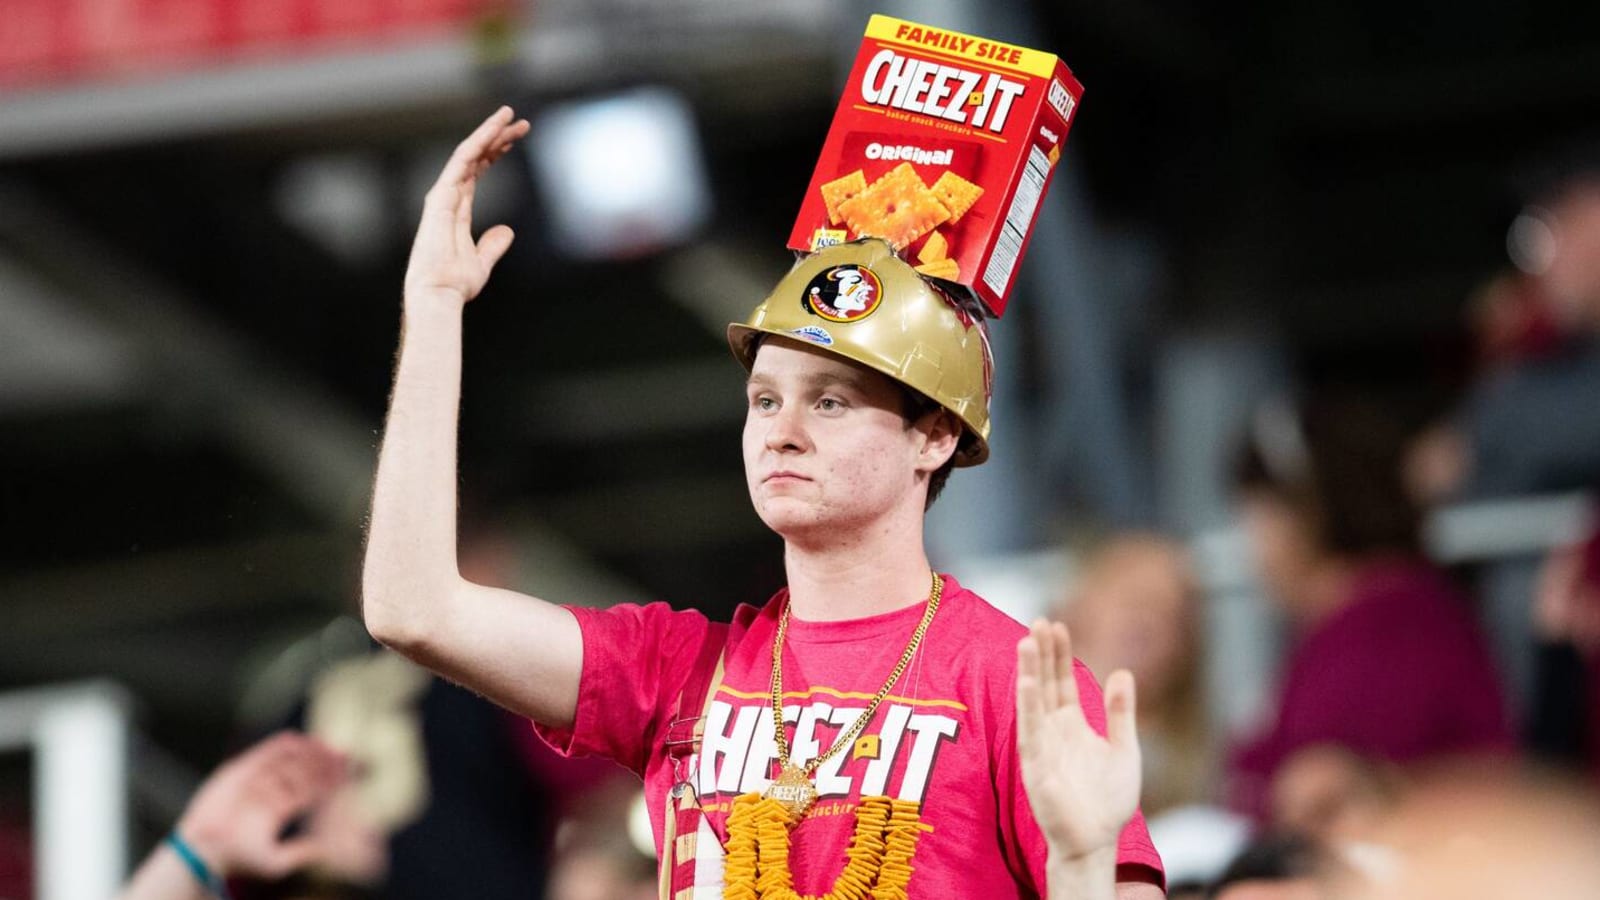 Cheez-It out, Pop-Tarts in this college football bowl season